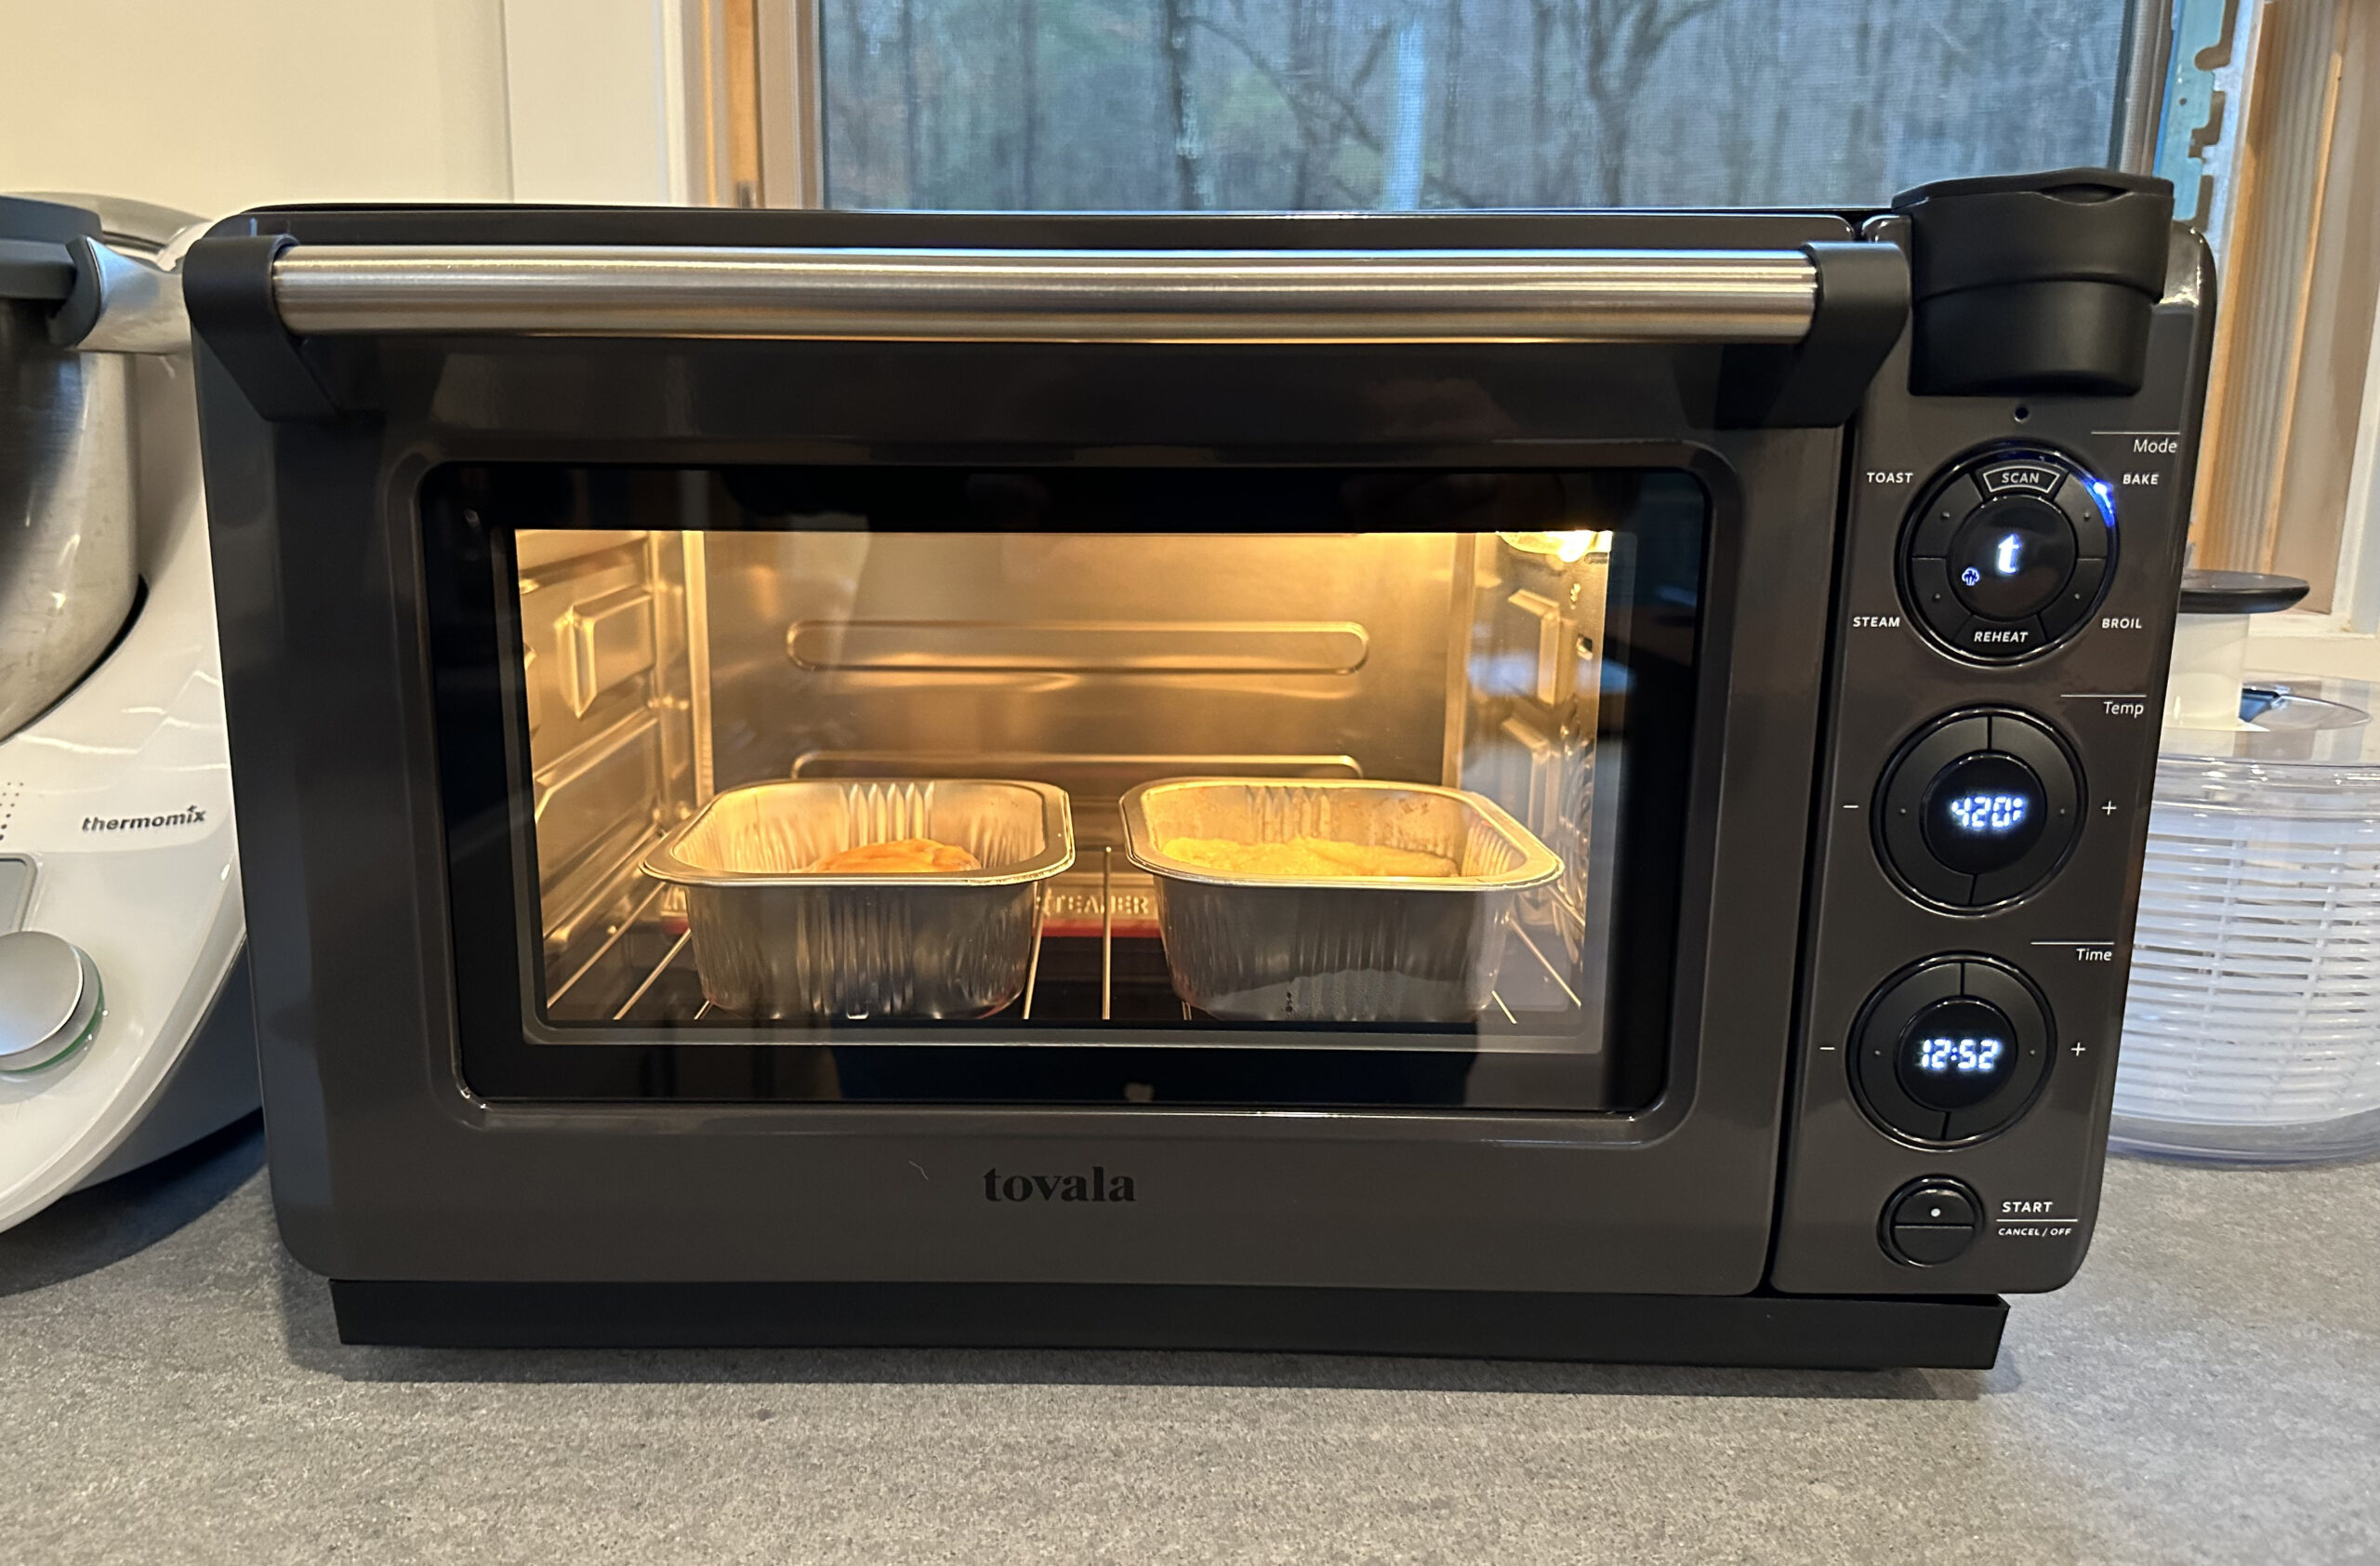 Tovala Gen 2 Smart Steam Oven | Countertop WiFi Oven | 5 Mode Programmable Oven | Toast, Steam, Bake, Broil and Reheat | Black & Stainless Steel